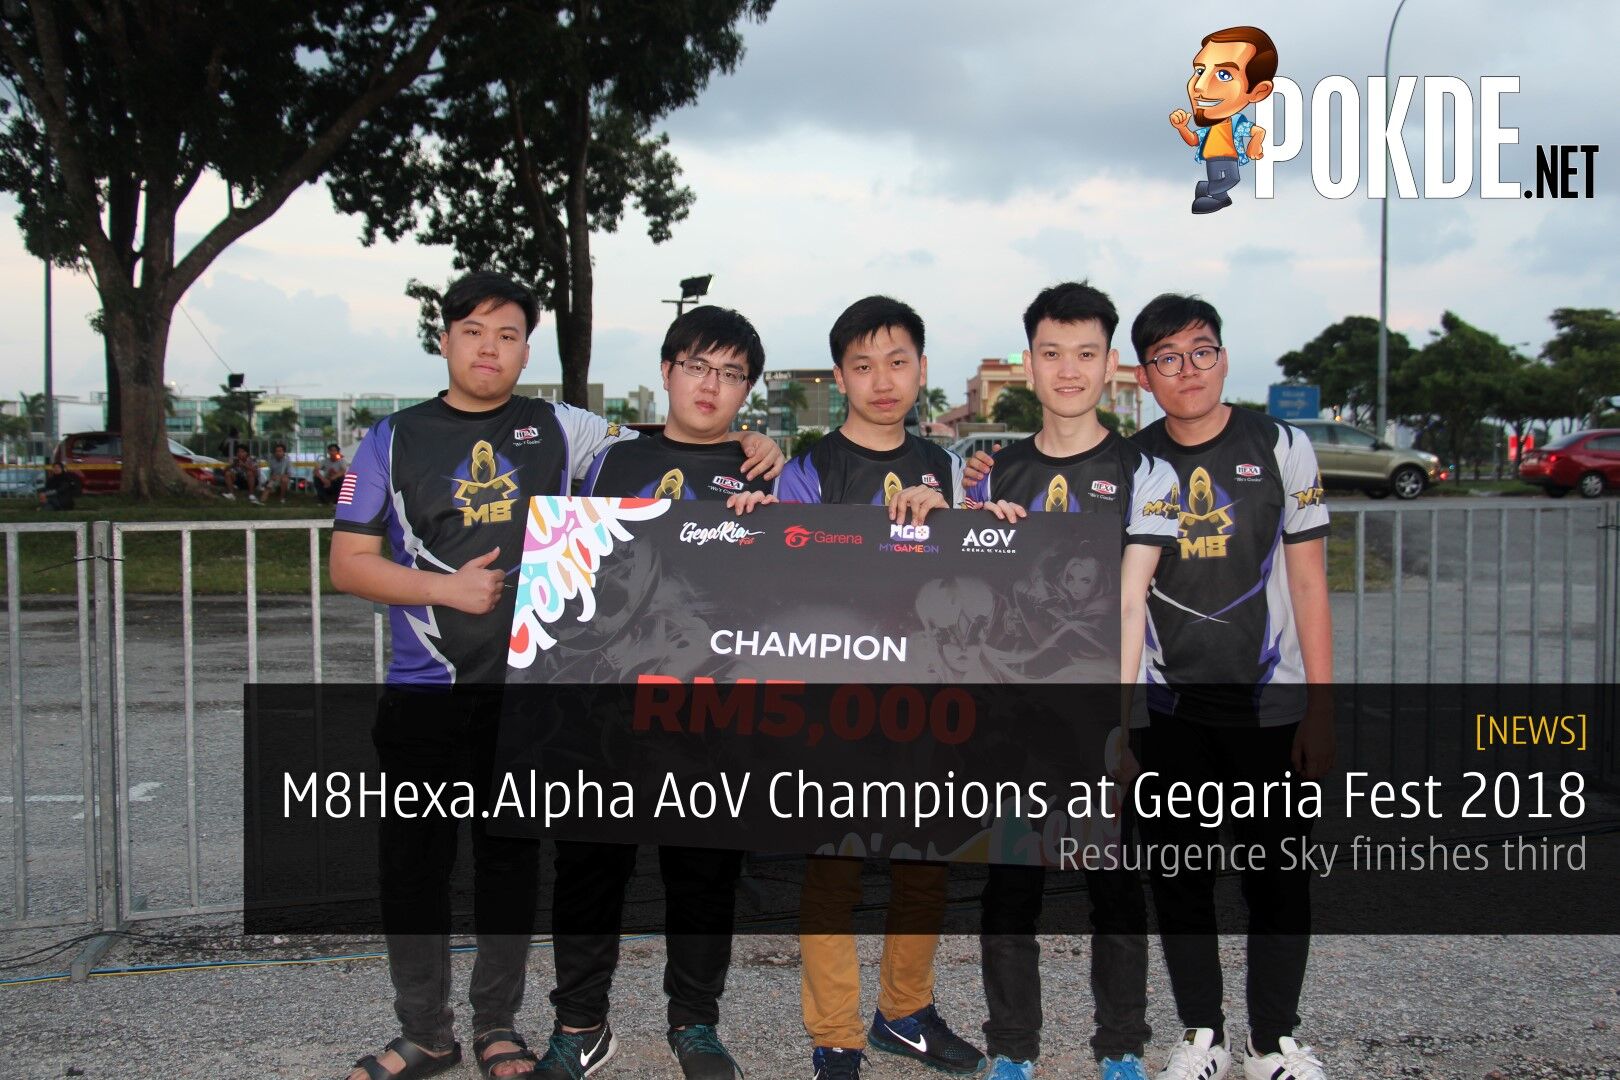 M8Hexa.Alpha AoV Champions at Gegaria Fest 2018 - AOV Valor Cup champions Resurgence Sky finishes third 25